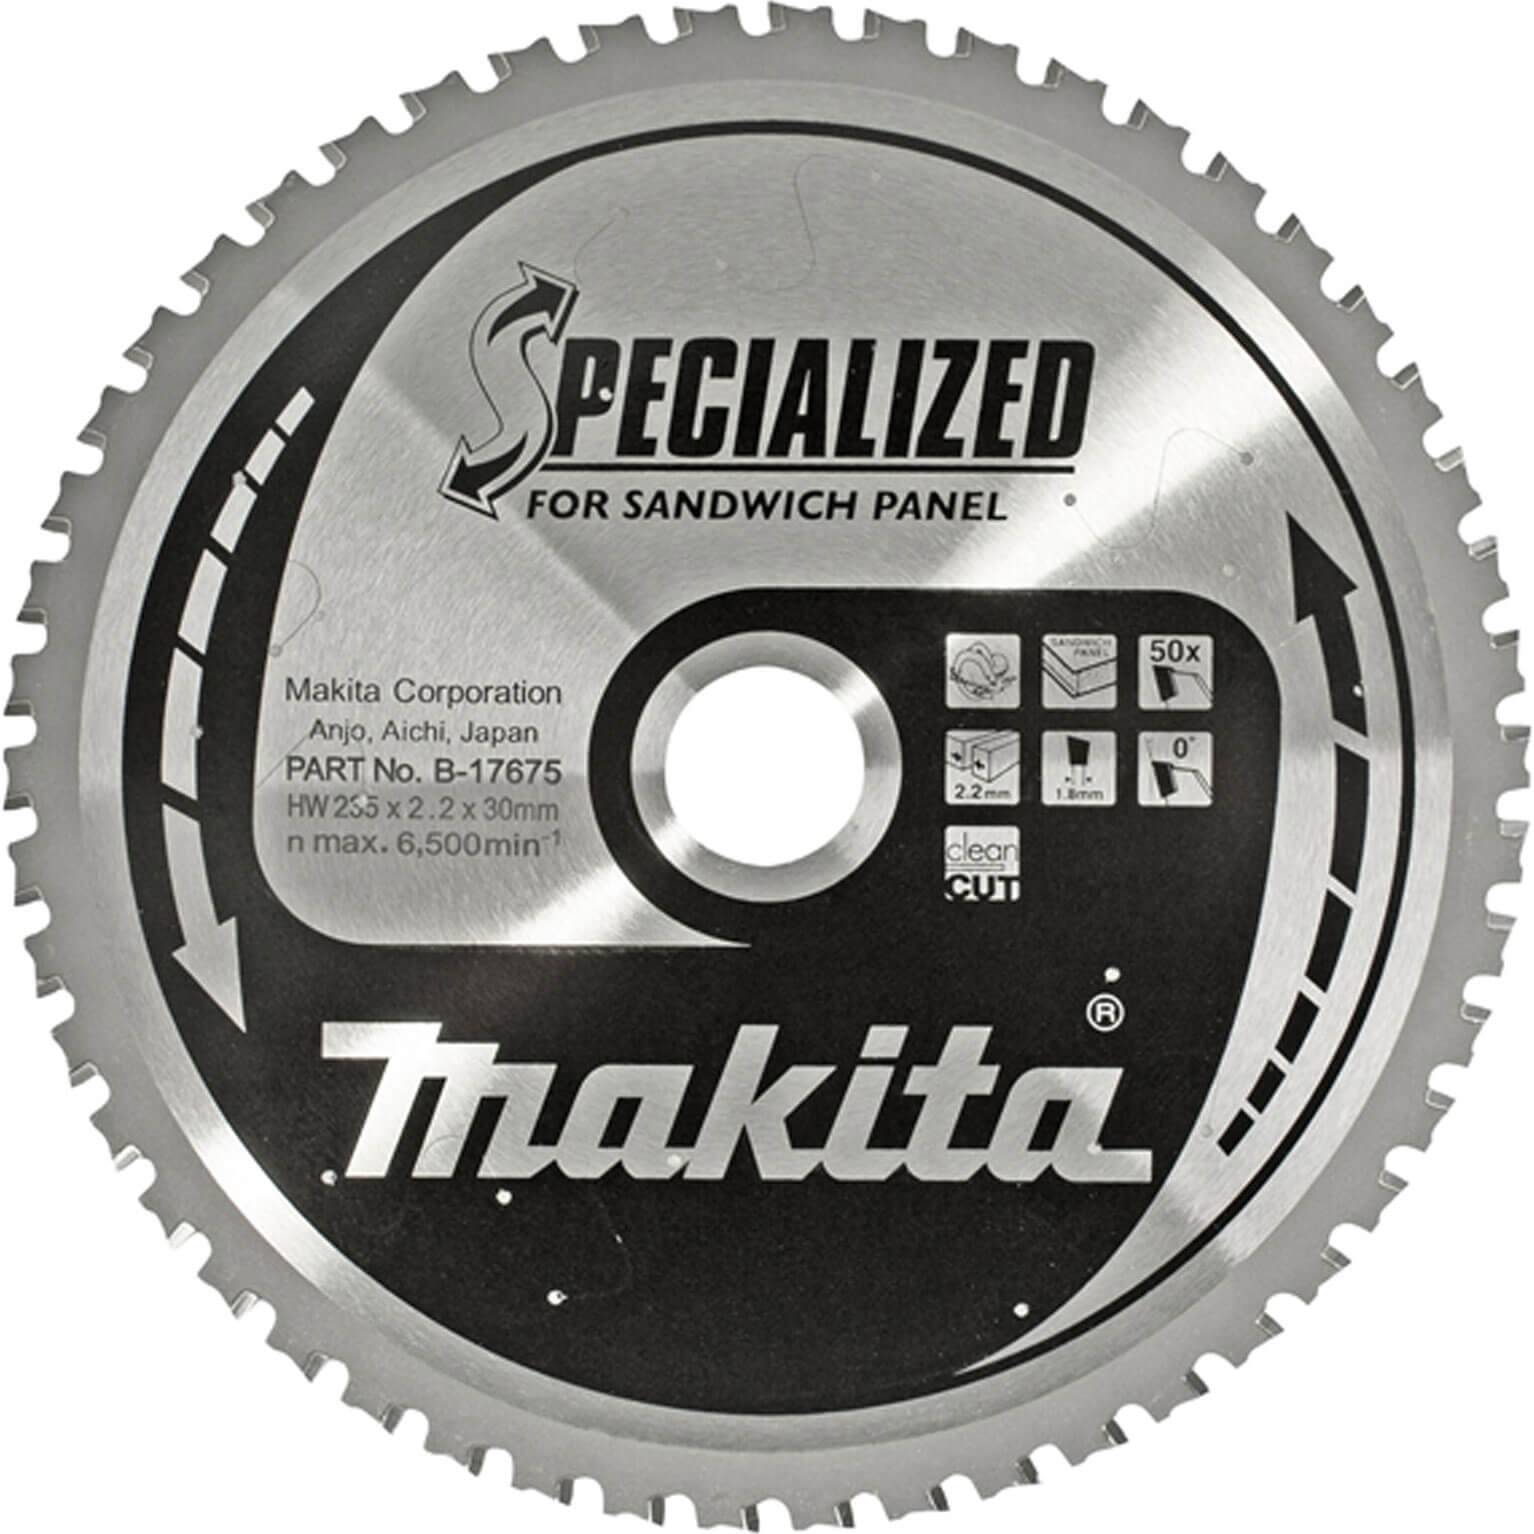 Photo of Makita Specialized Sandwich Panel Cutting Saw Blade 235mm 50t 30mm